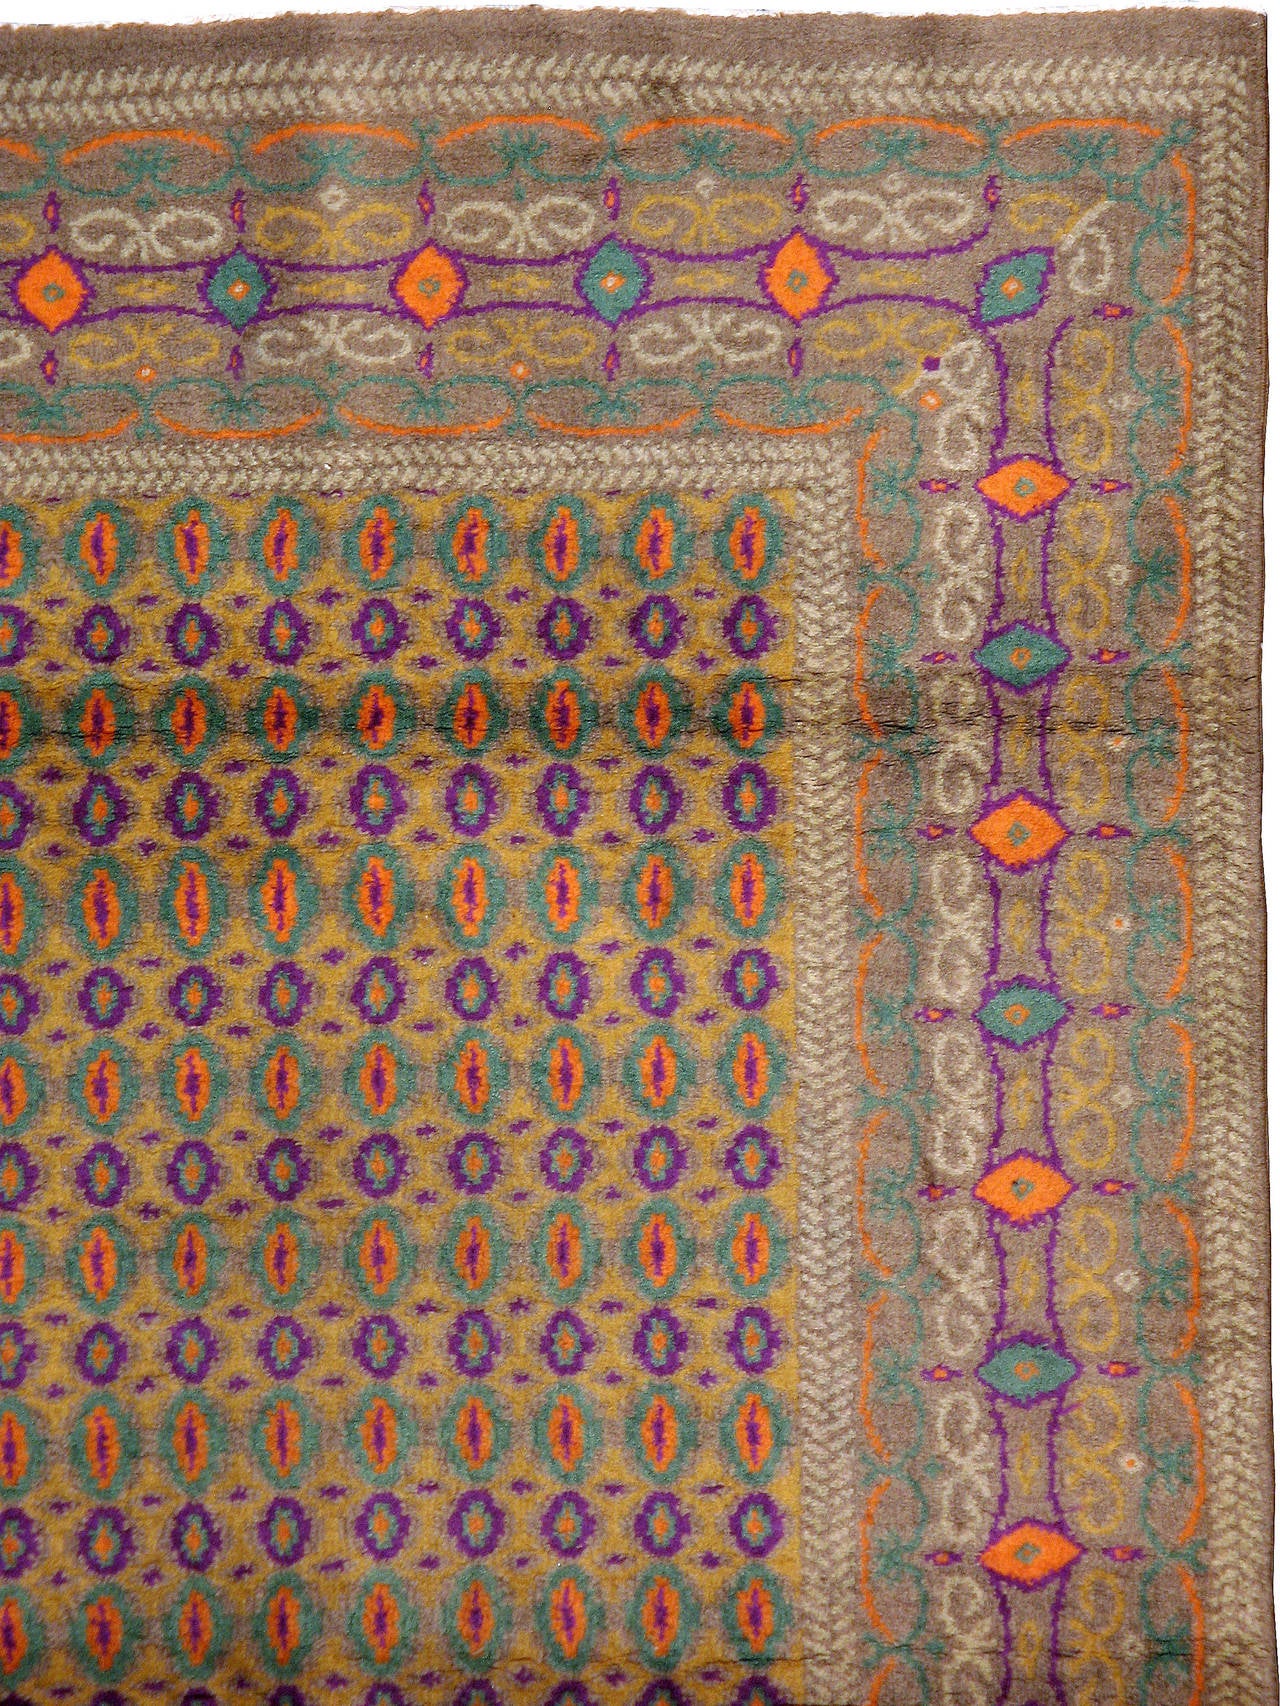 A vintage Indian Lahore carpet from the second quarter of the 20th century; part of a conglomerate of rugs influenced by the modernist movement.